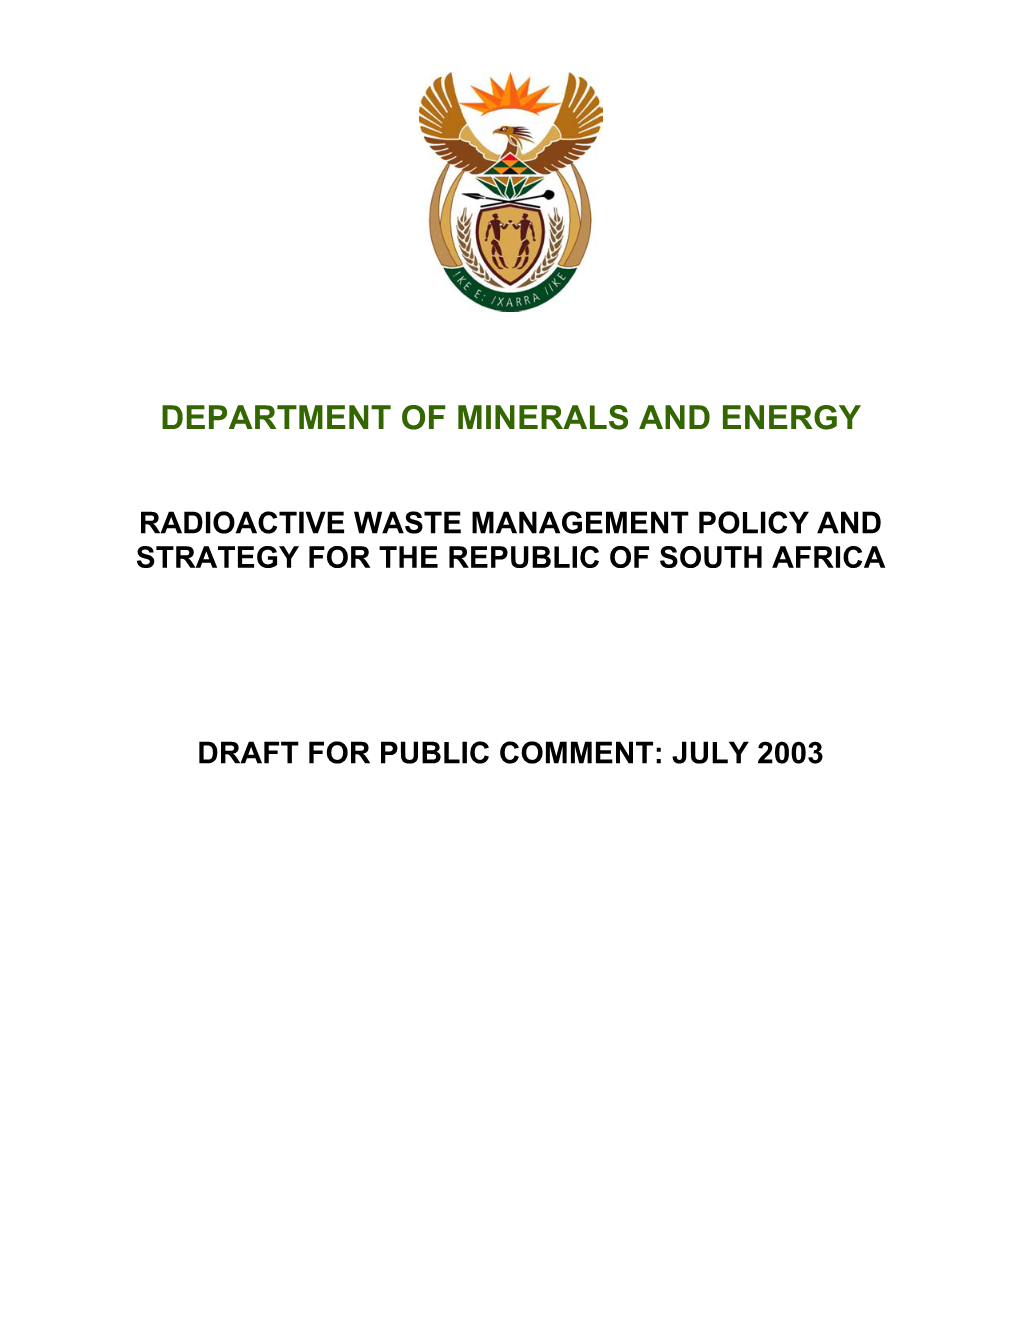 Radioactive Waste Management Policy and Strategy for the Republic of South Africa